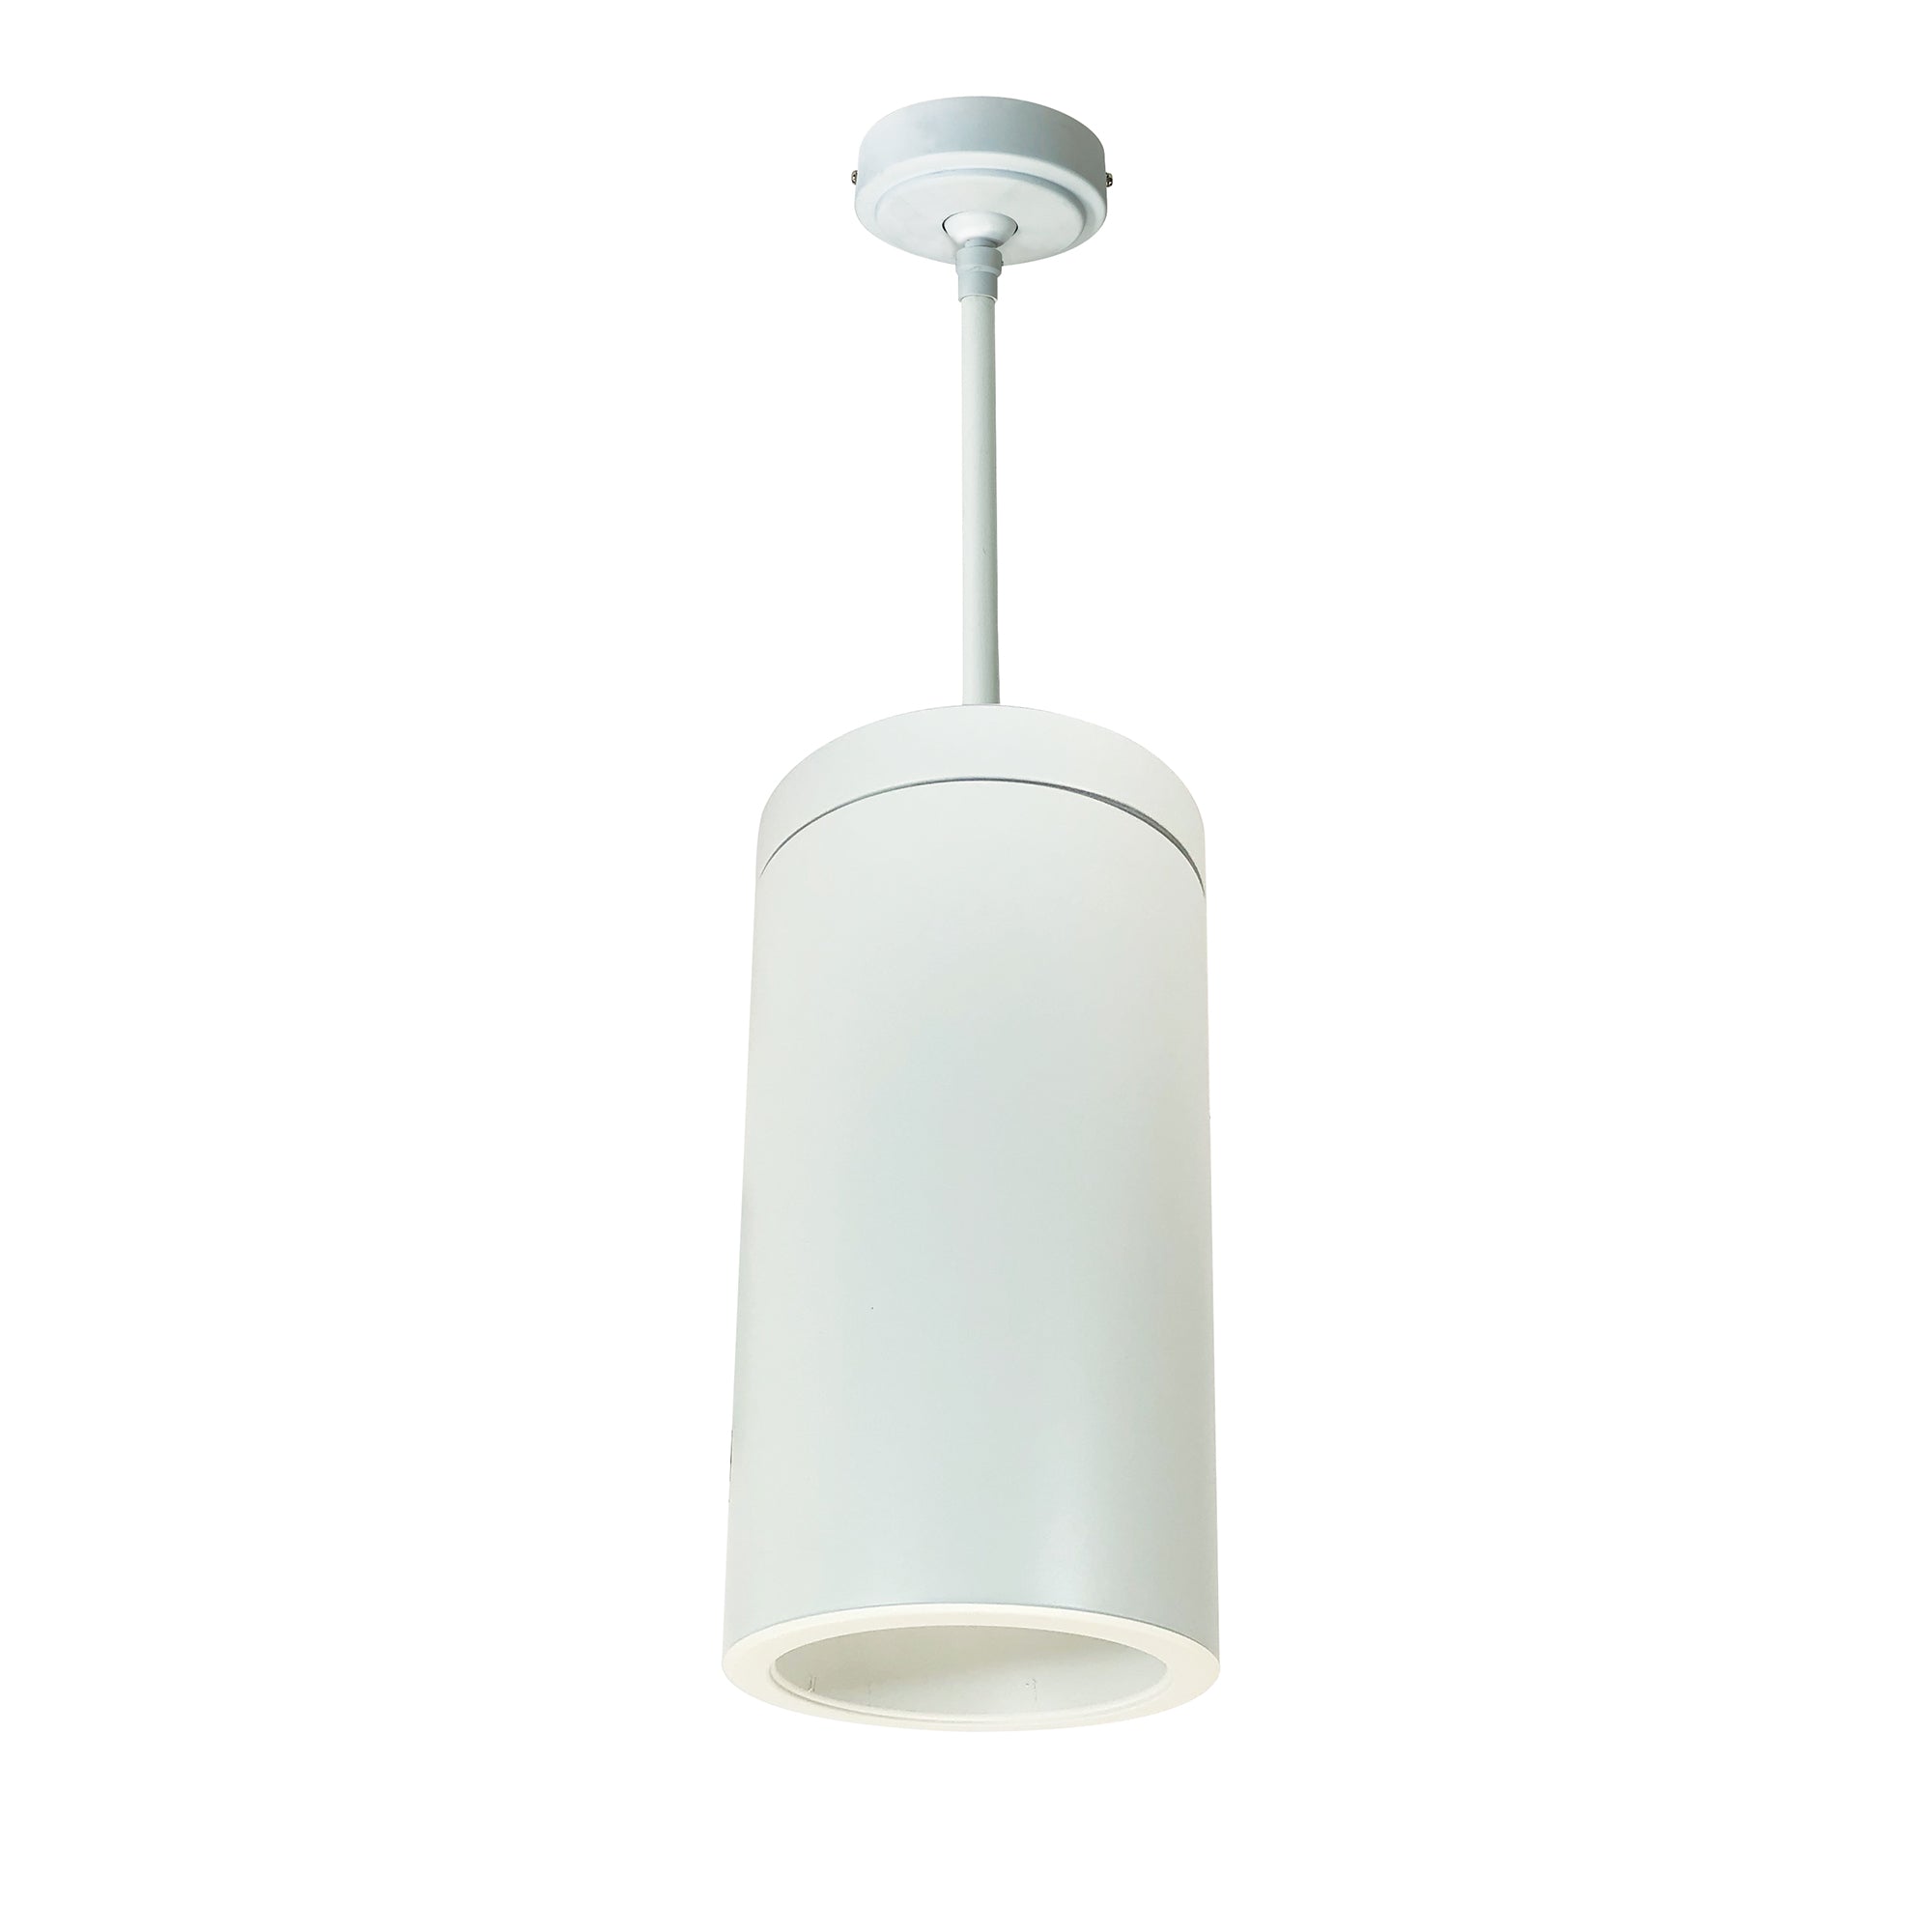 Nora Lighting LE45 - NYLS2-6P35130MWWW6